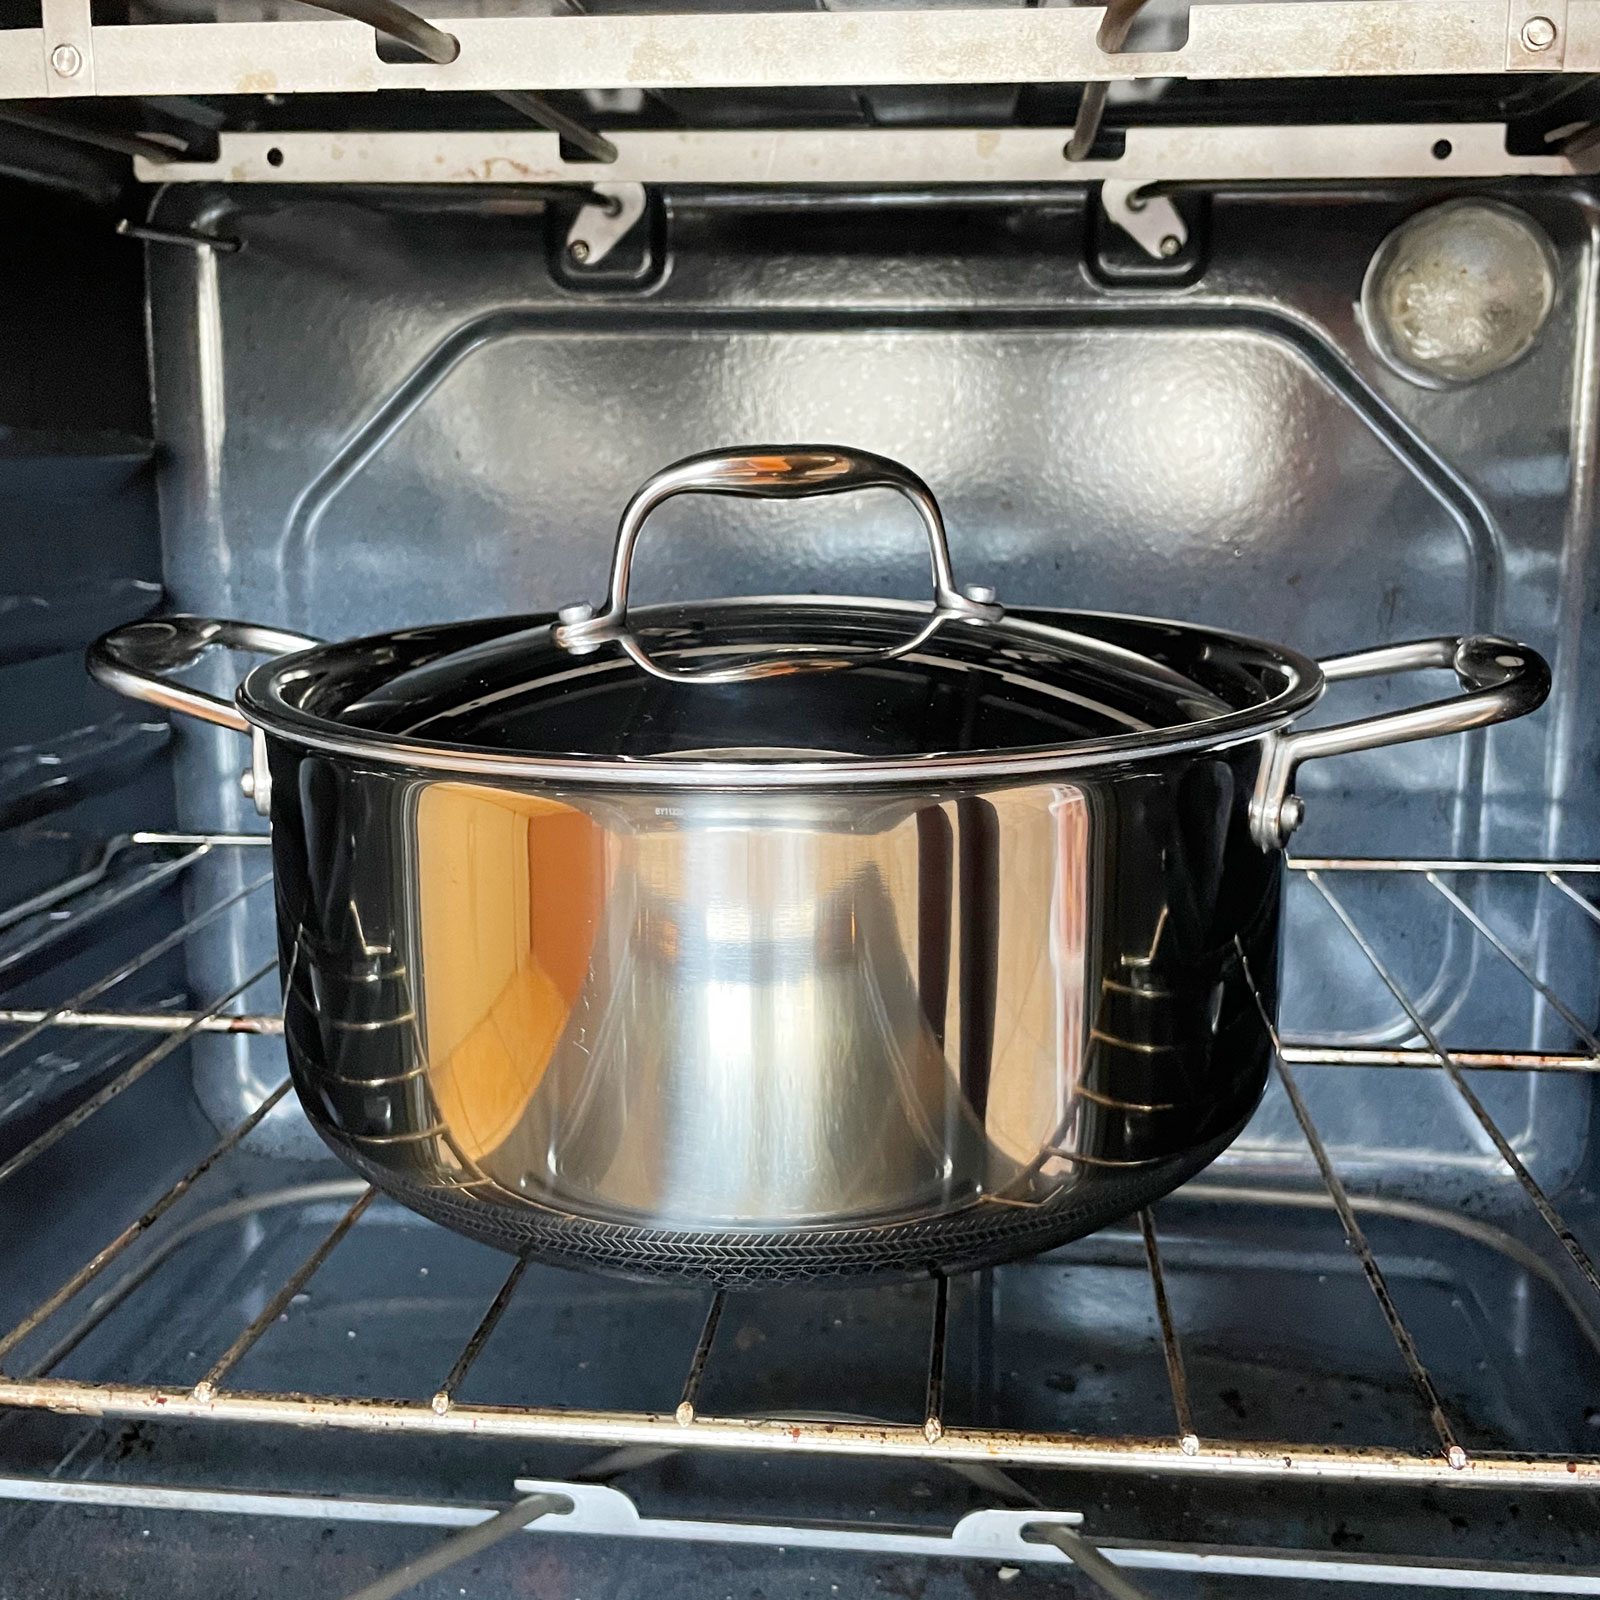 HexClad Hybrid Nonstick Dutch Oven, 5-Quart, Stainless Steel Lid,  Dishwasher and Oven Safe, Induction Ready, Compatible with All Cooktops